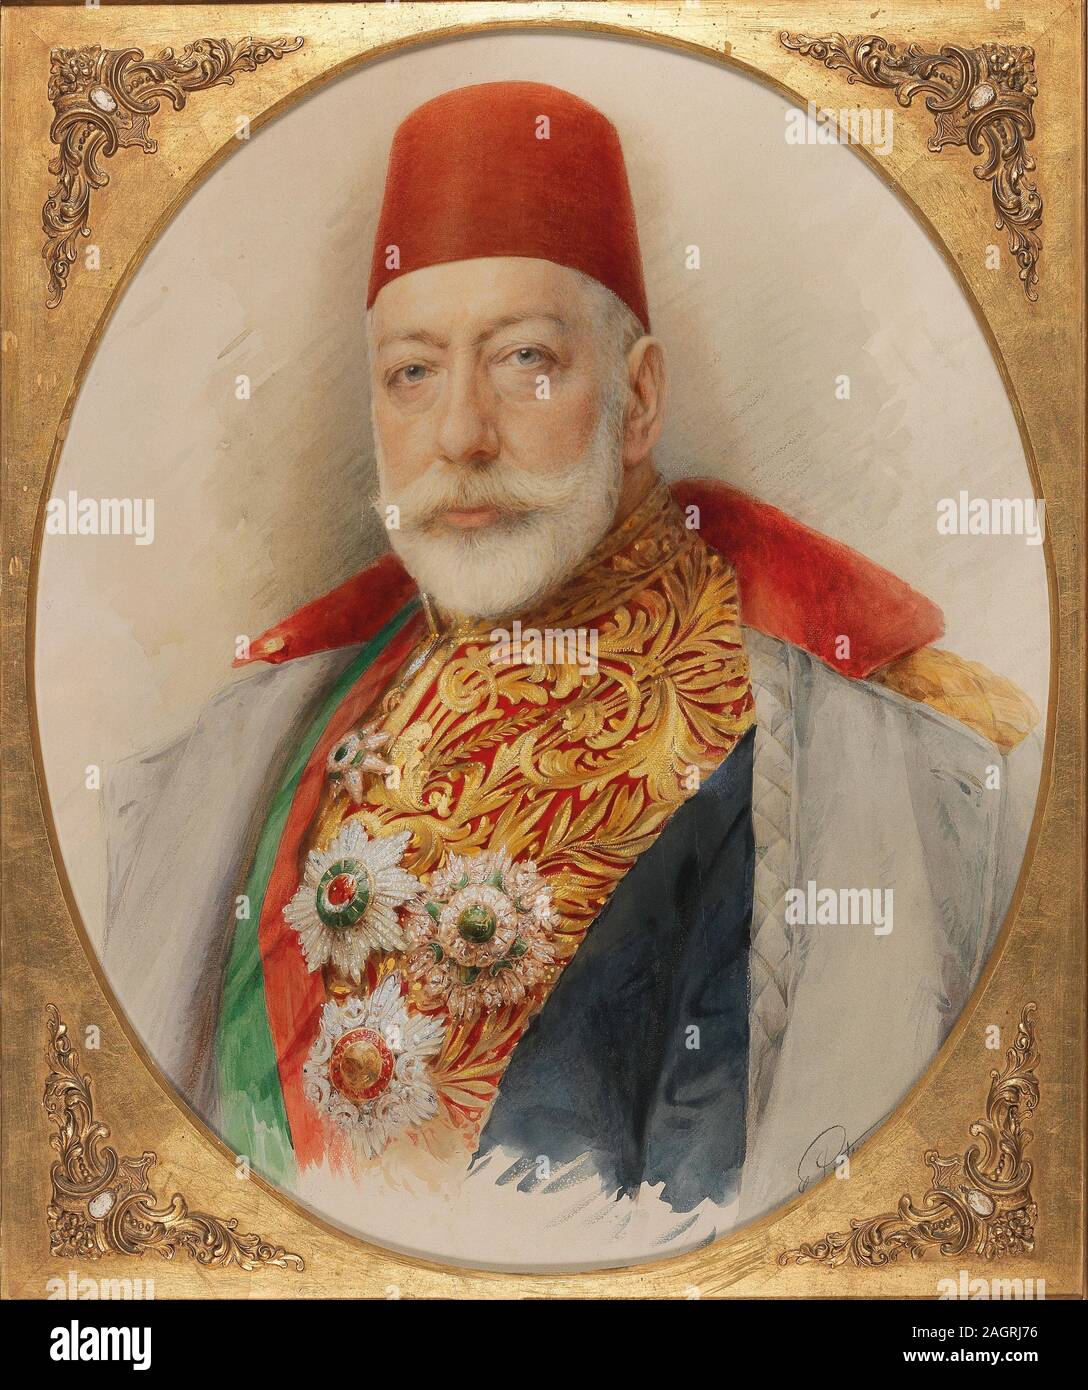 Portrait of Mehmed V (1844-1918), Sultan and Caliph of the Ottoman Empire. Museum: PRIVATE COLLECTION. Author: CARL PIETZNER. Stock Photo